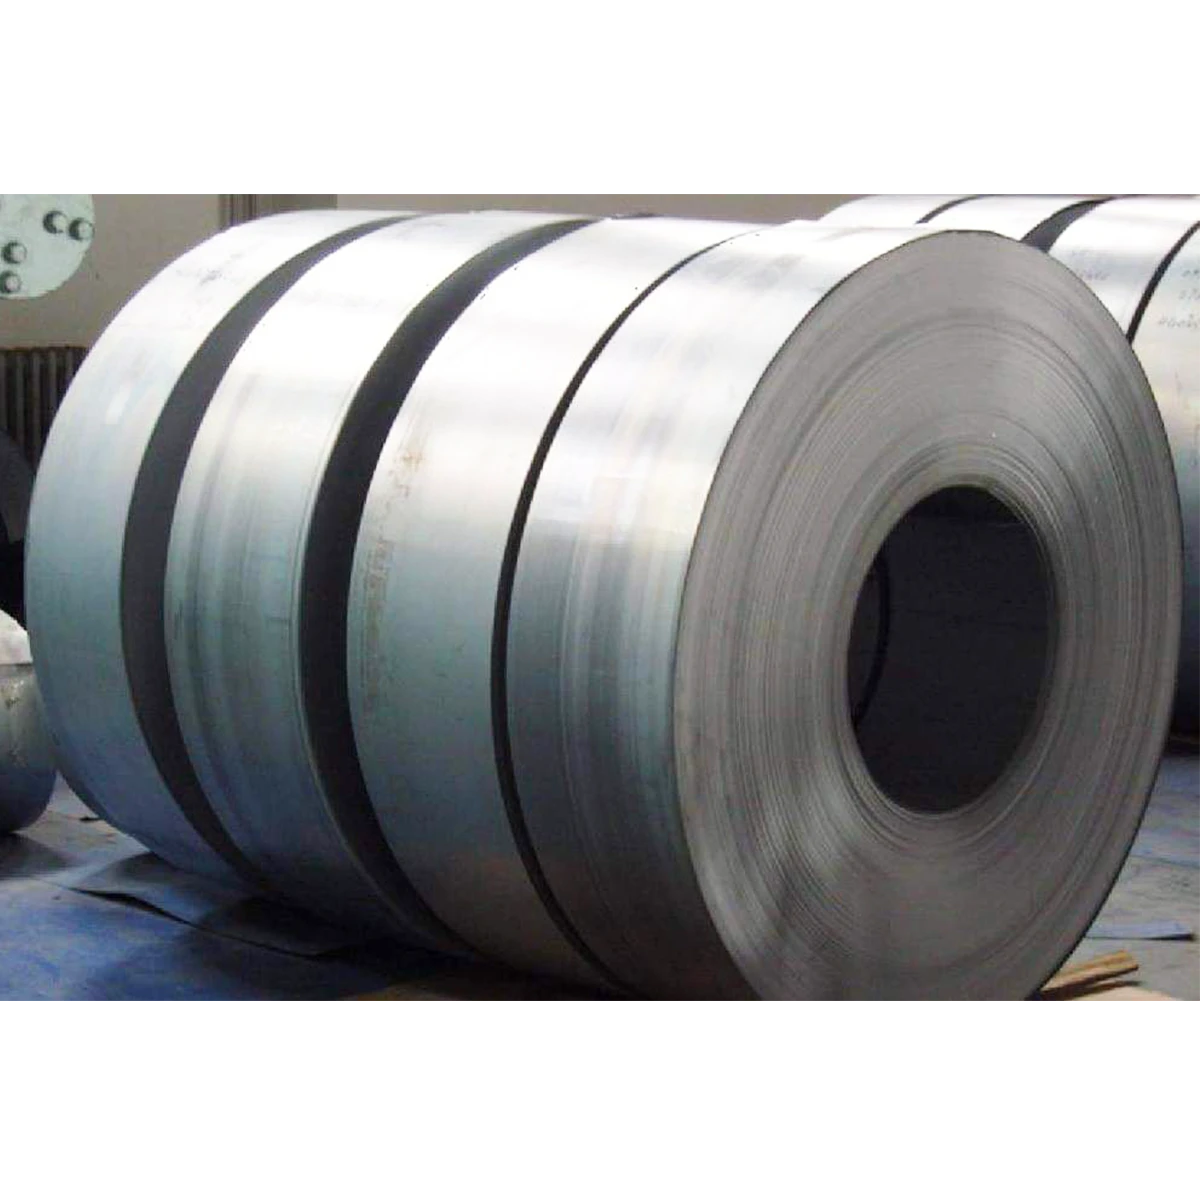 ASTM & JIS standard Galvanized Steel Pipe For Construction